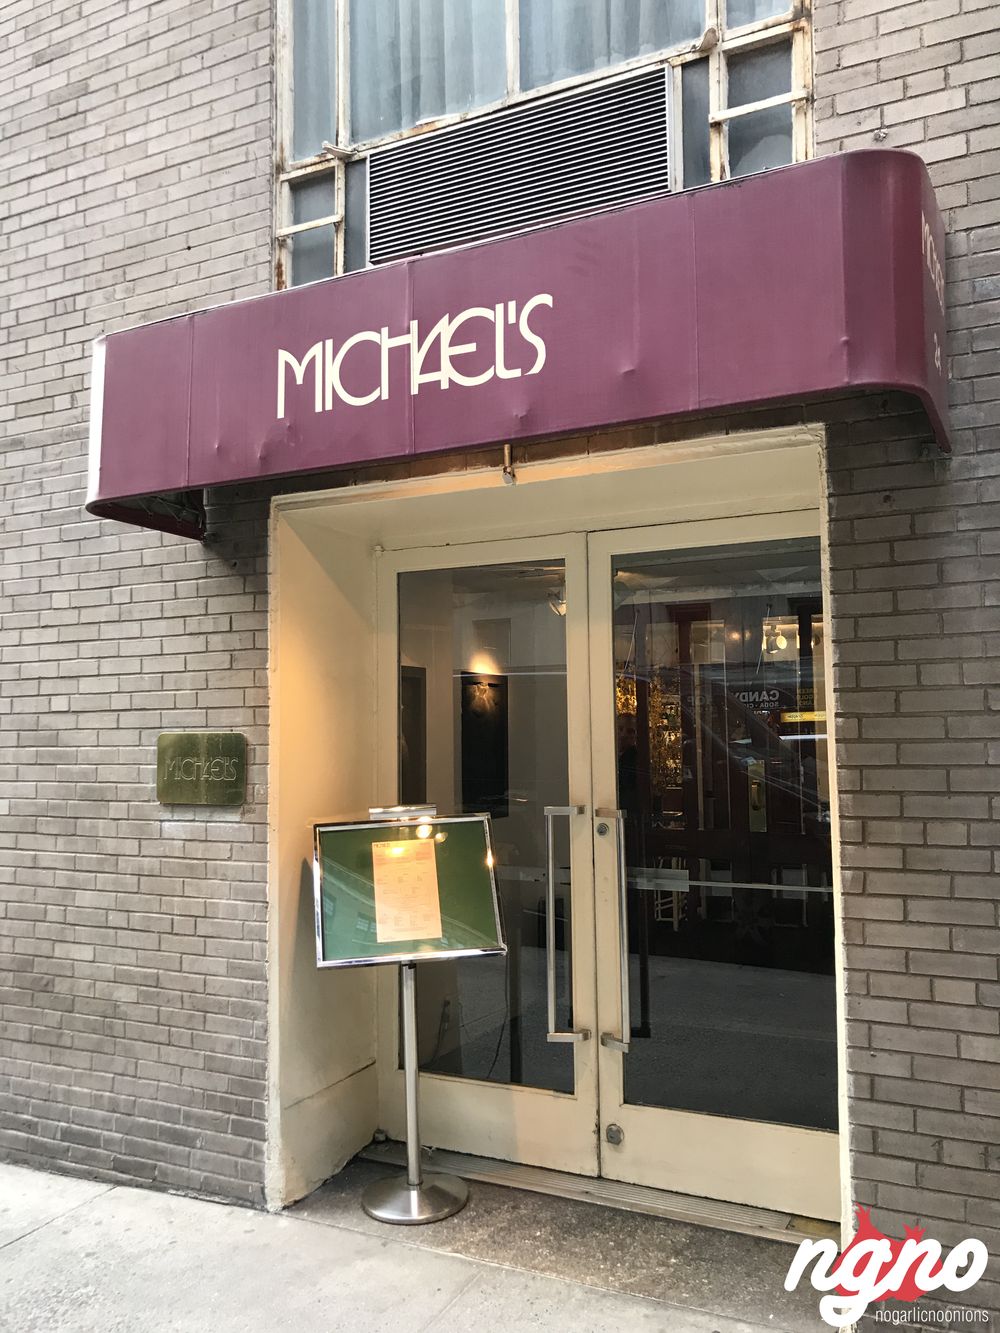 Michael's New York: Overrated, Expensive and Not Worth Trying